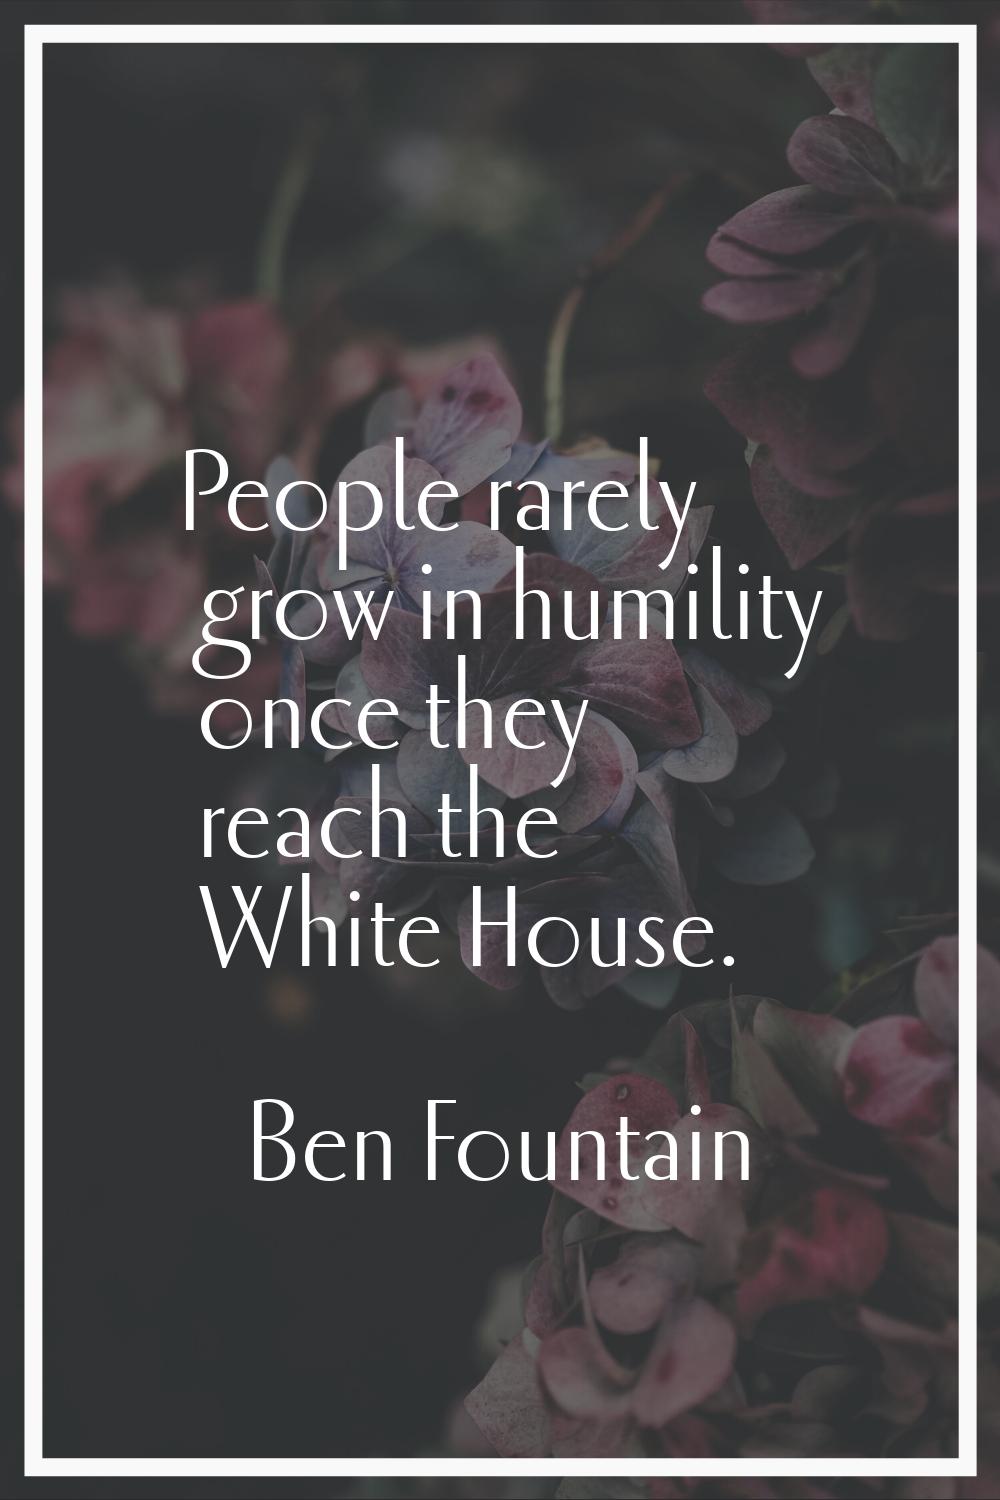 People rarely grow in humility once they reach the White House.